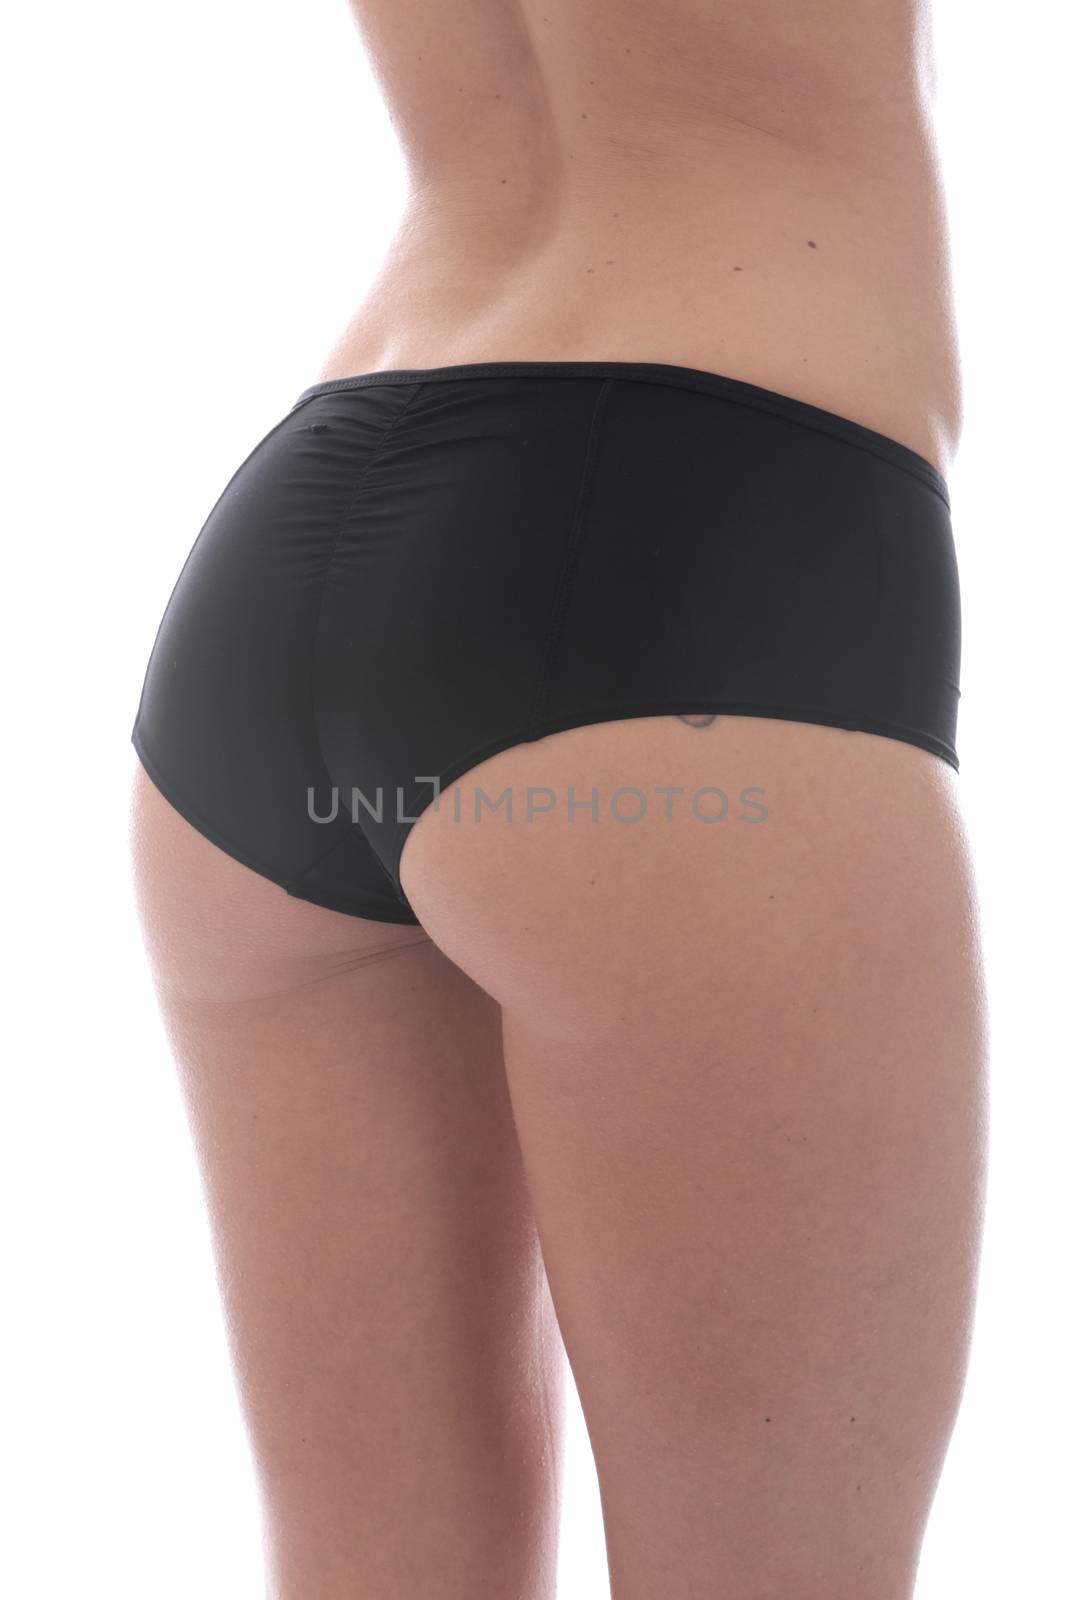 Model Released. Attractive Young Woman Wearing Sexy Black Panties by Whiteboxmedia